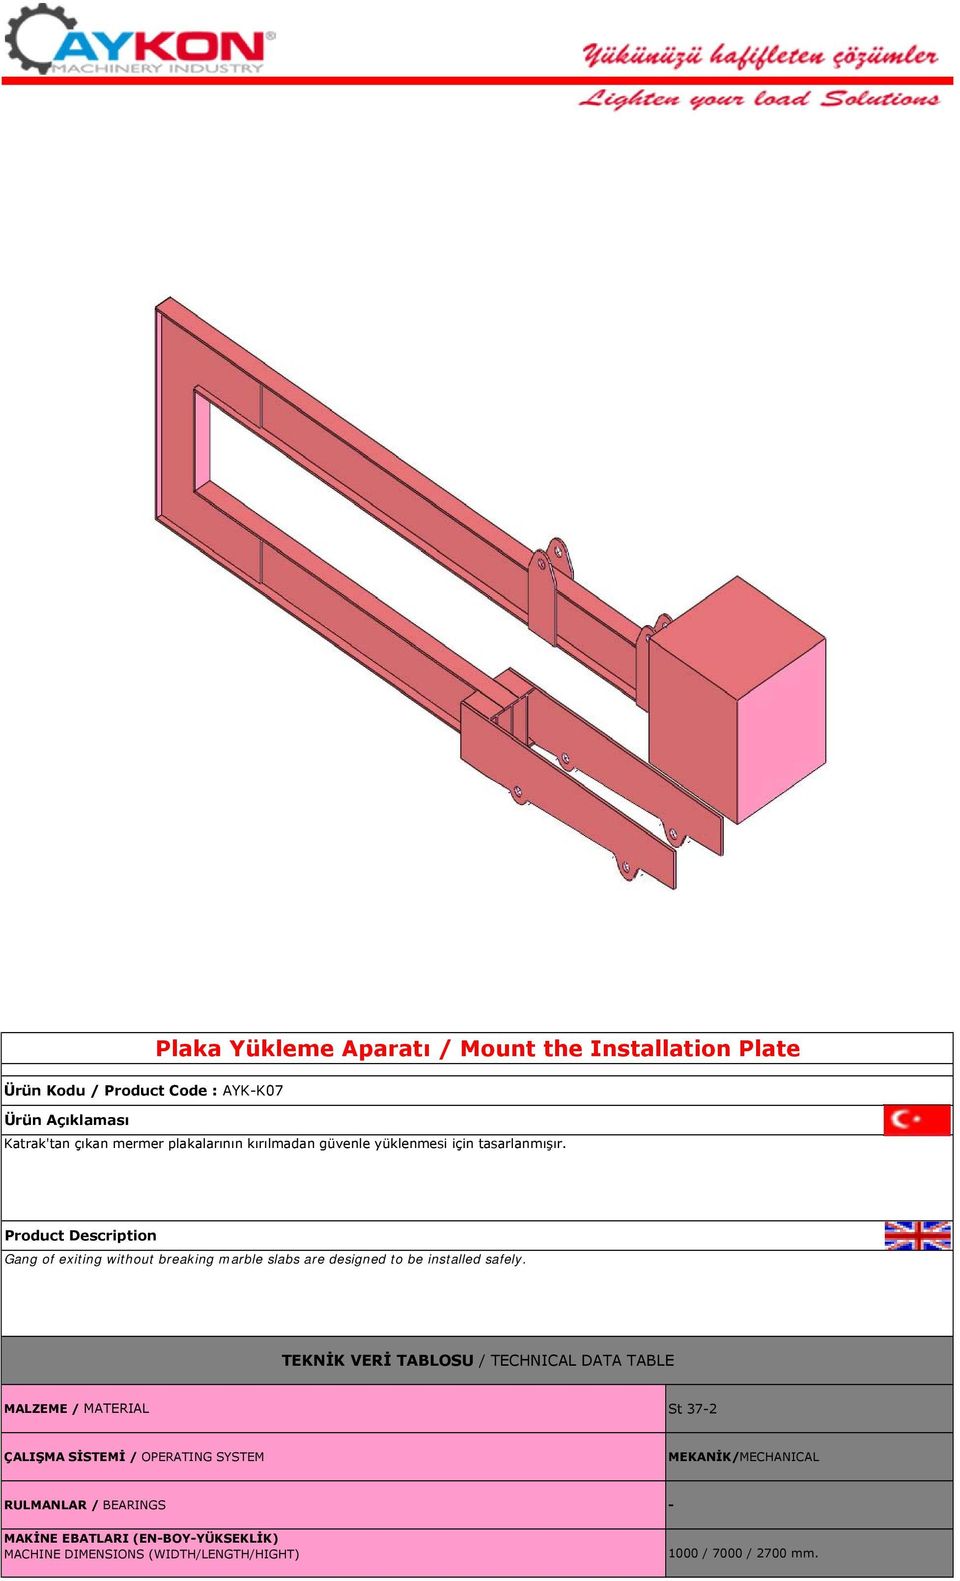 Product Description Gang of exiting without breaking marble slabs are designed to be installed safely.